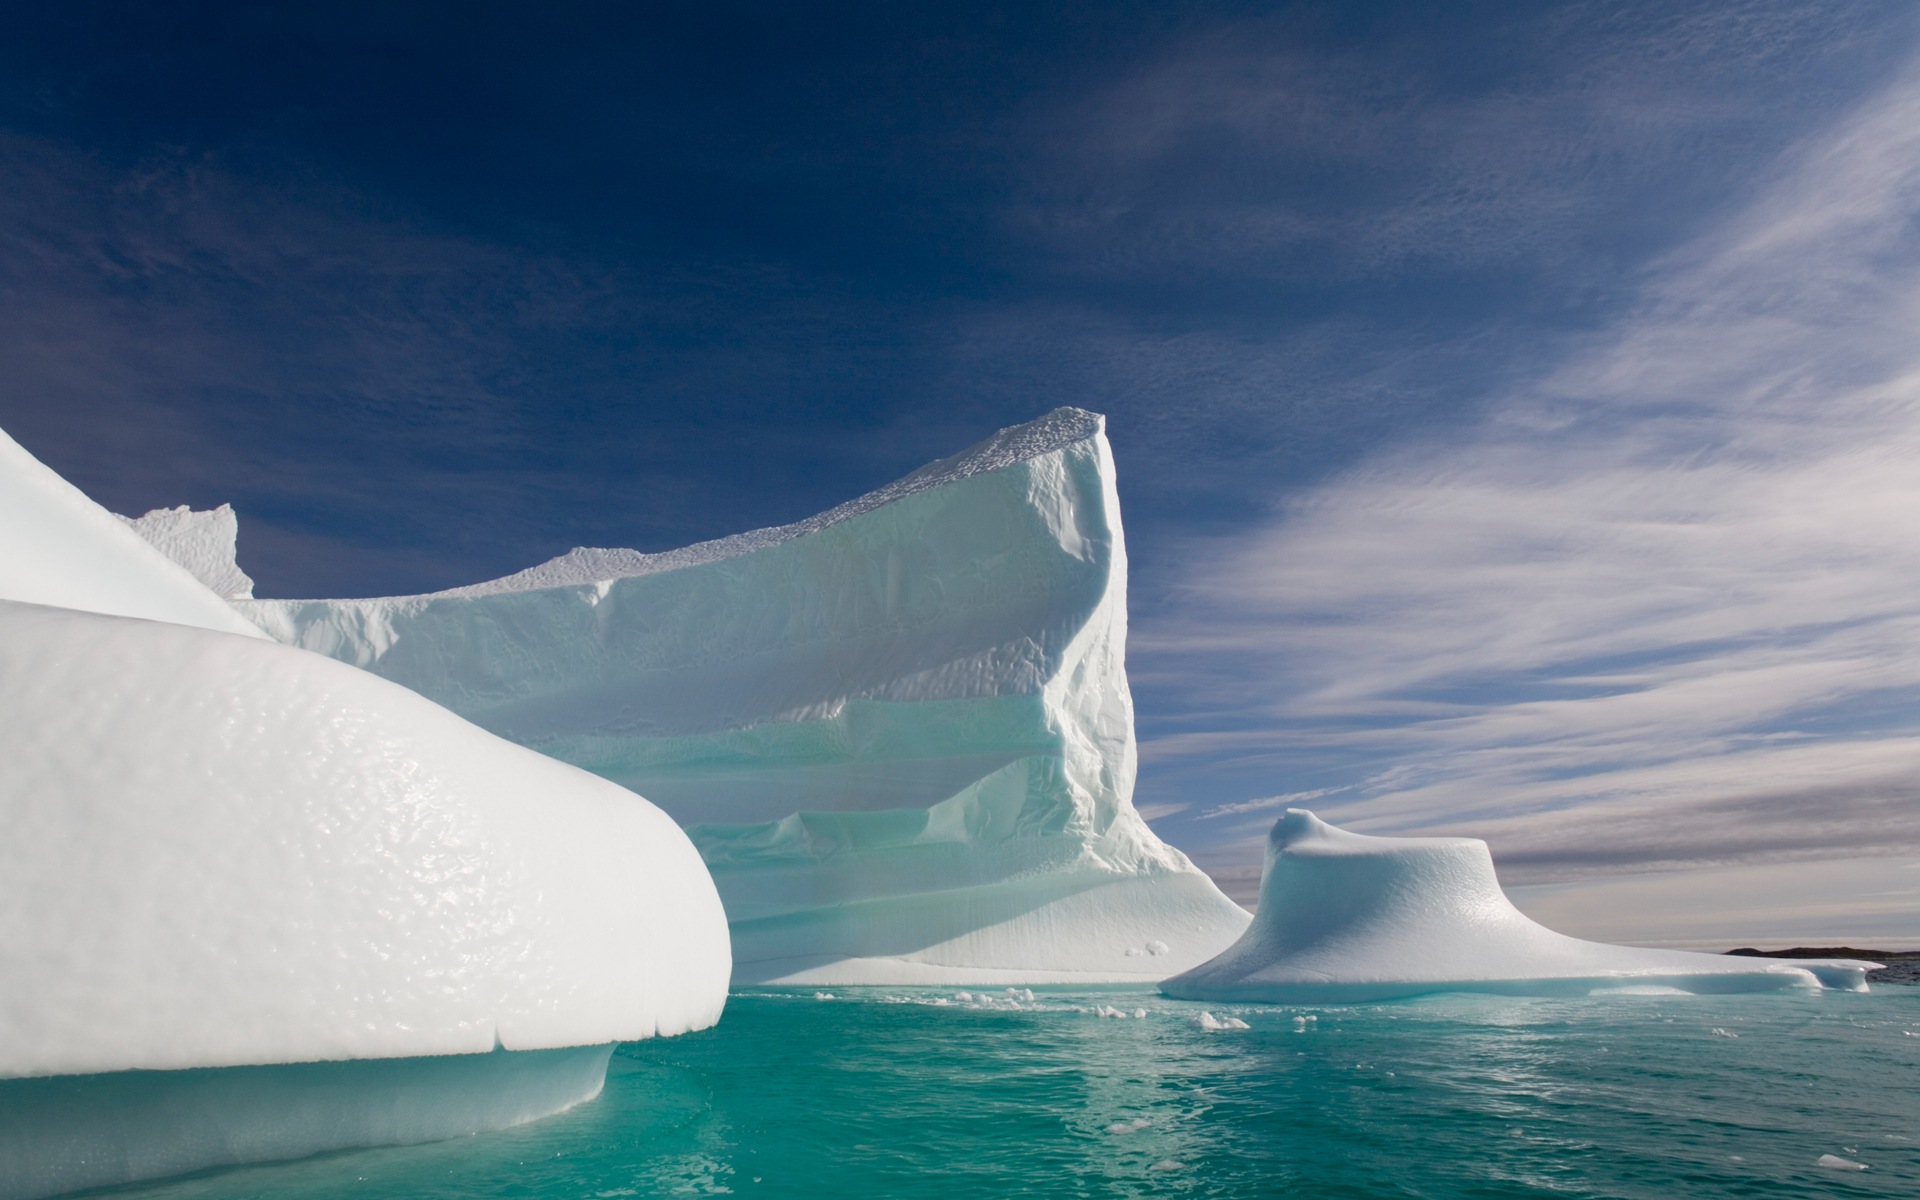 Windows 8 Wallpapers: Arctic, the nature ecological landscape, arctic animals #14 - 1920x1200